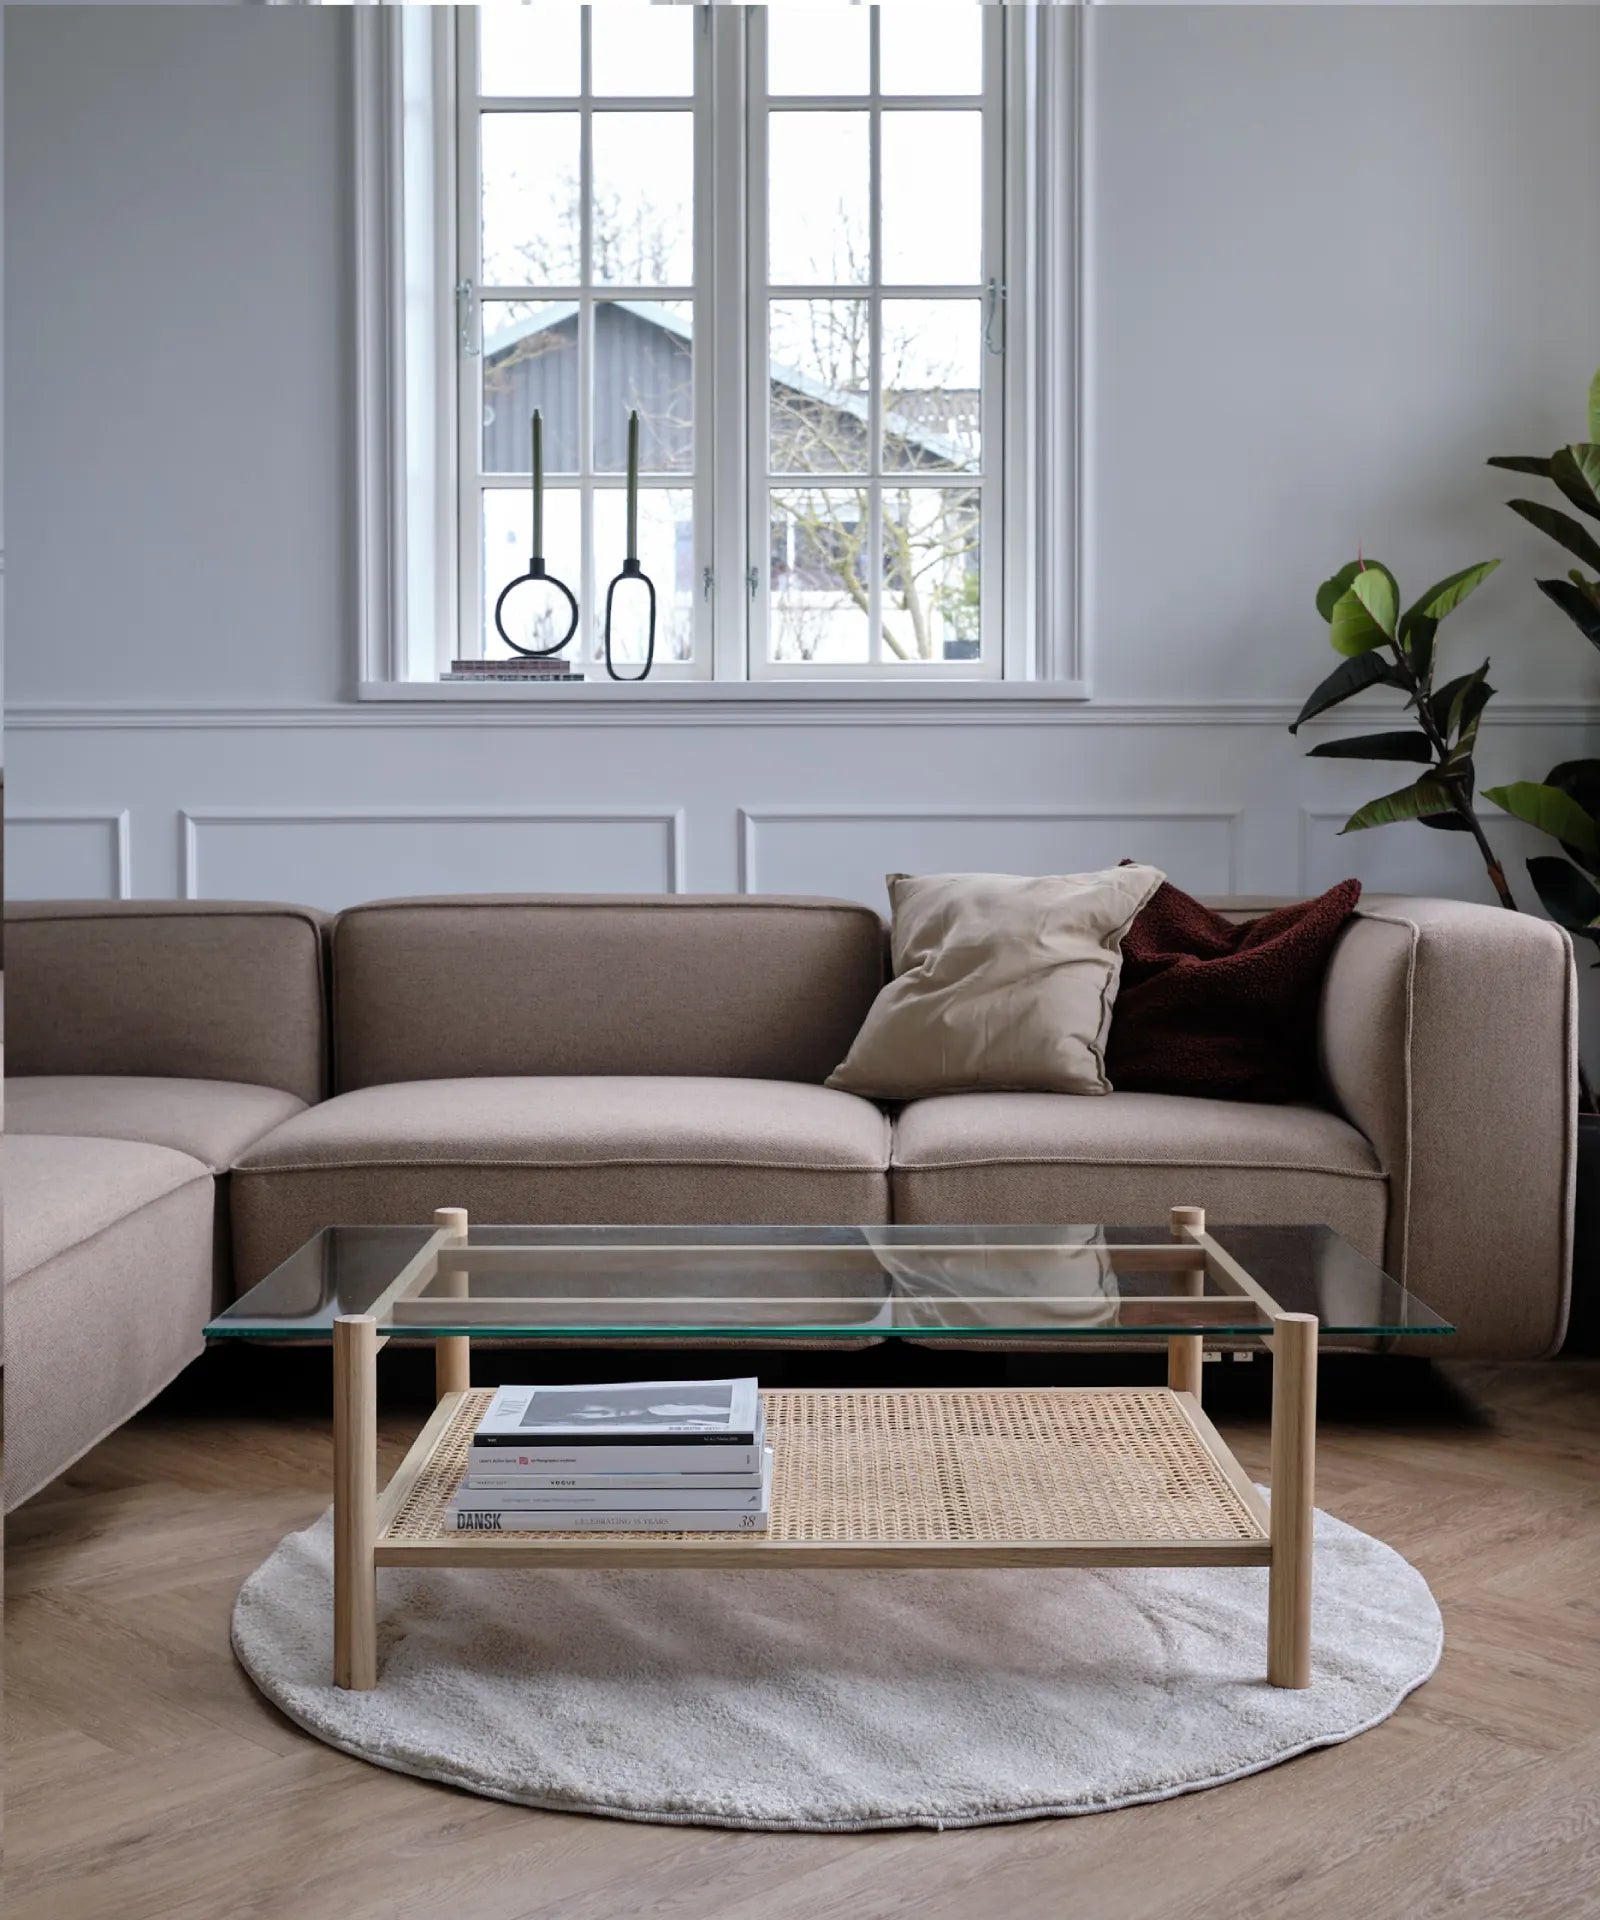 Neo coffee table with glass top - light natural oak